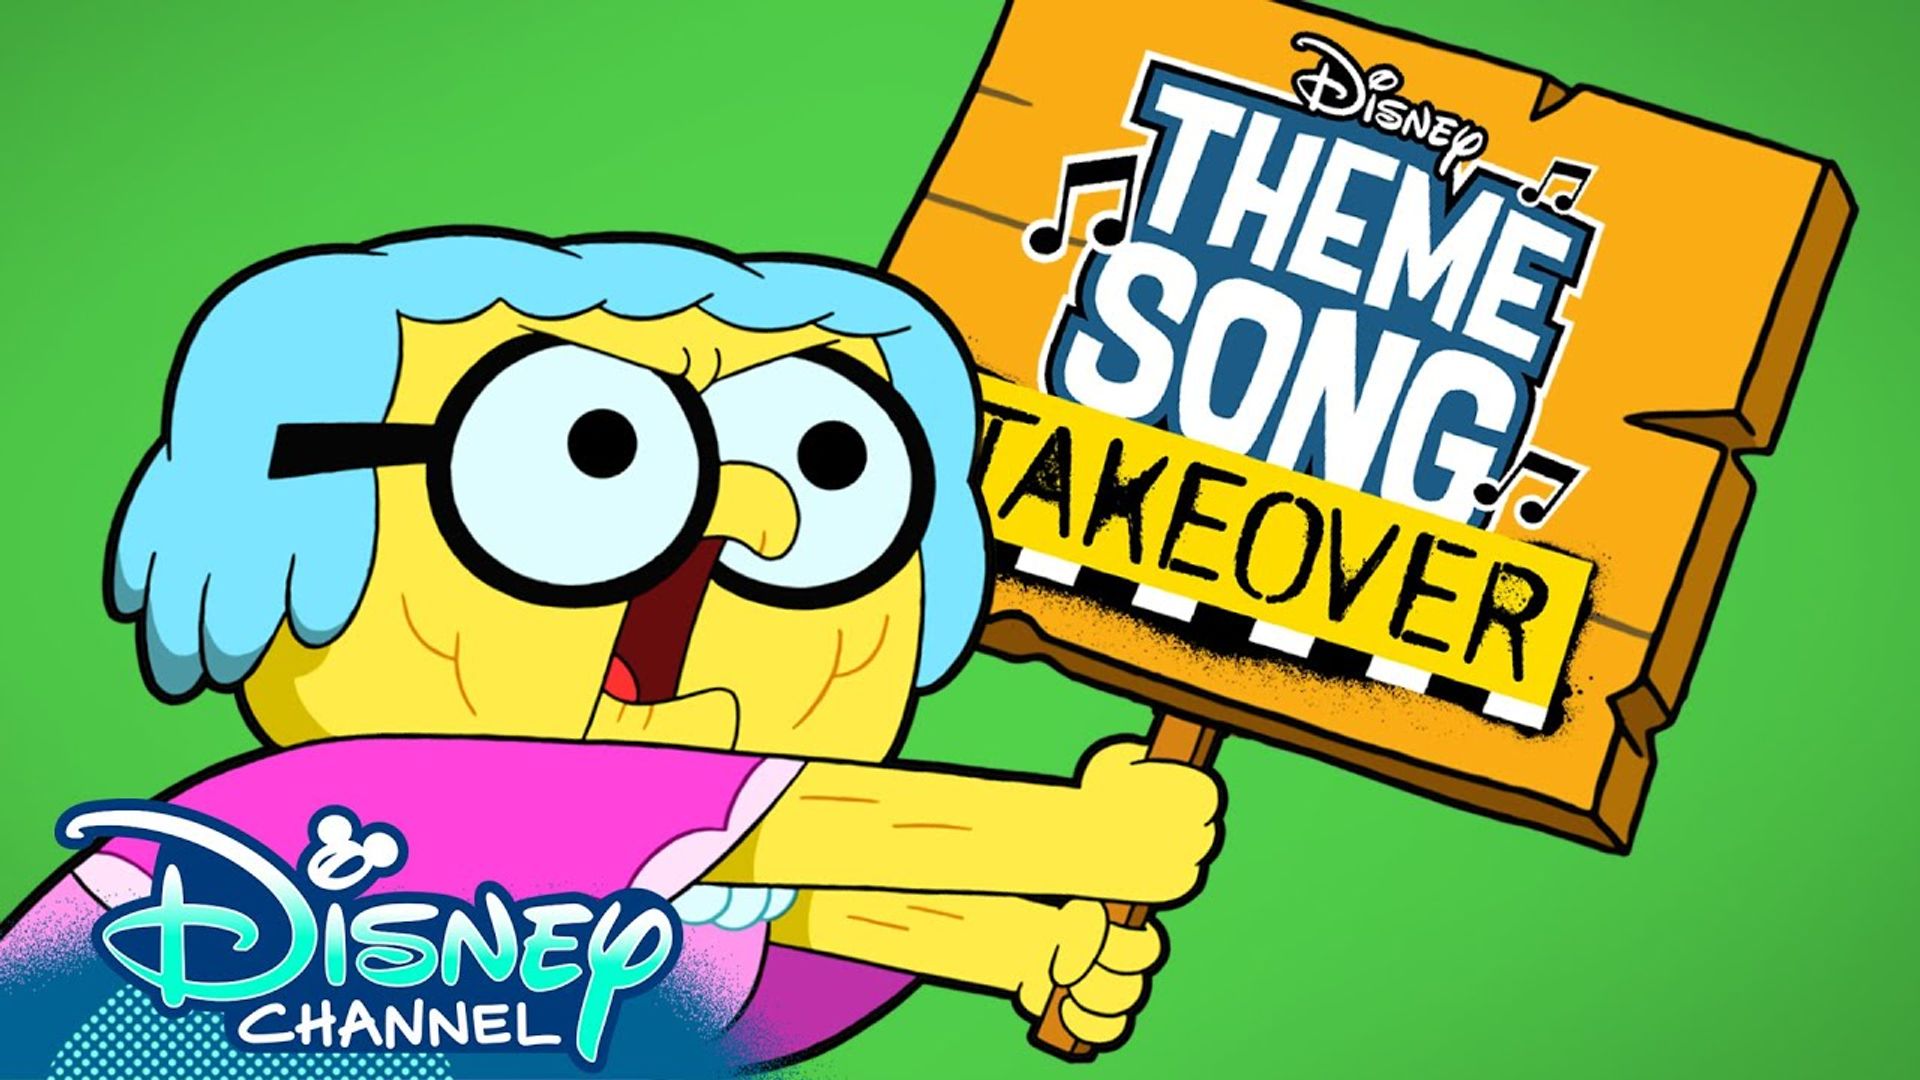 Theme Song Takeover background